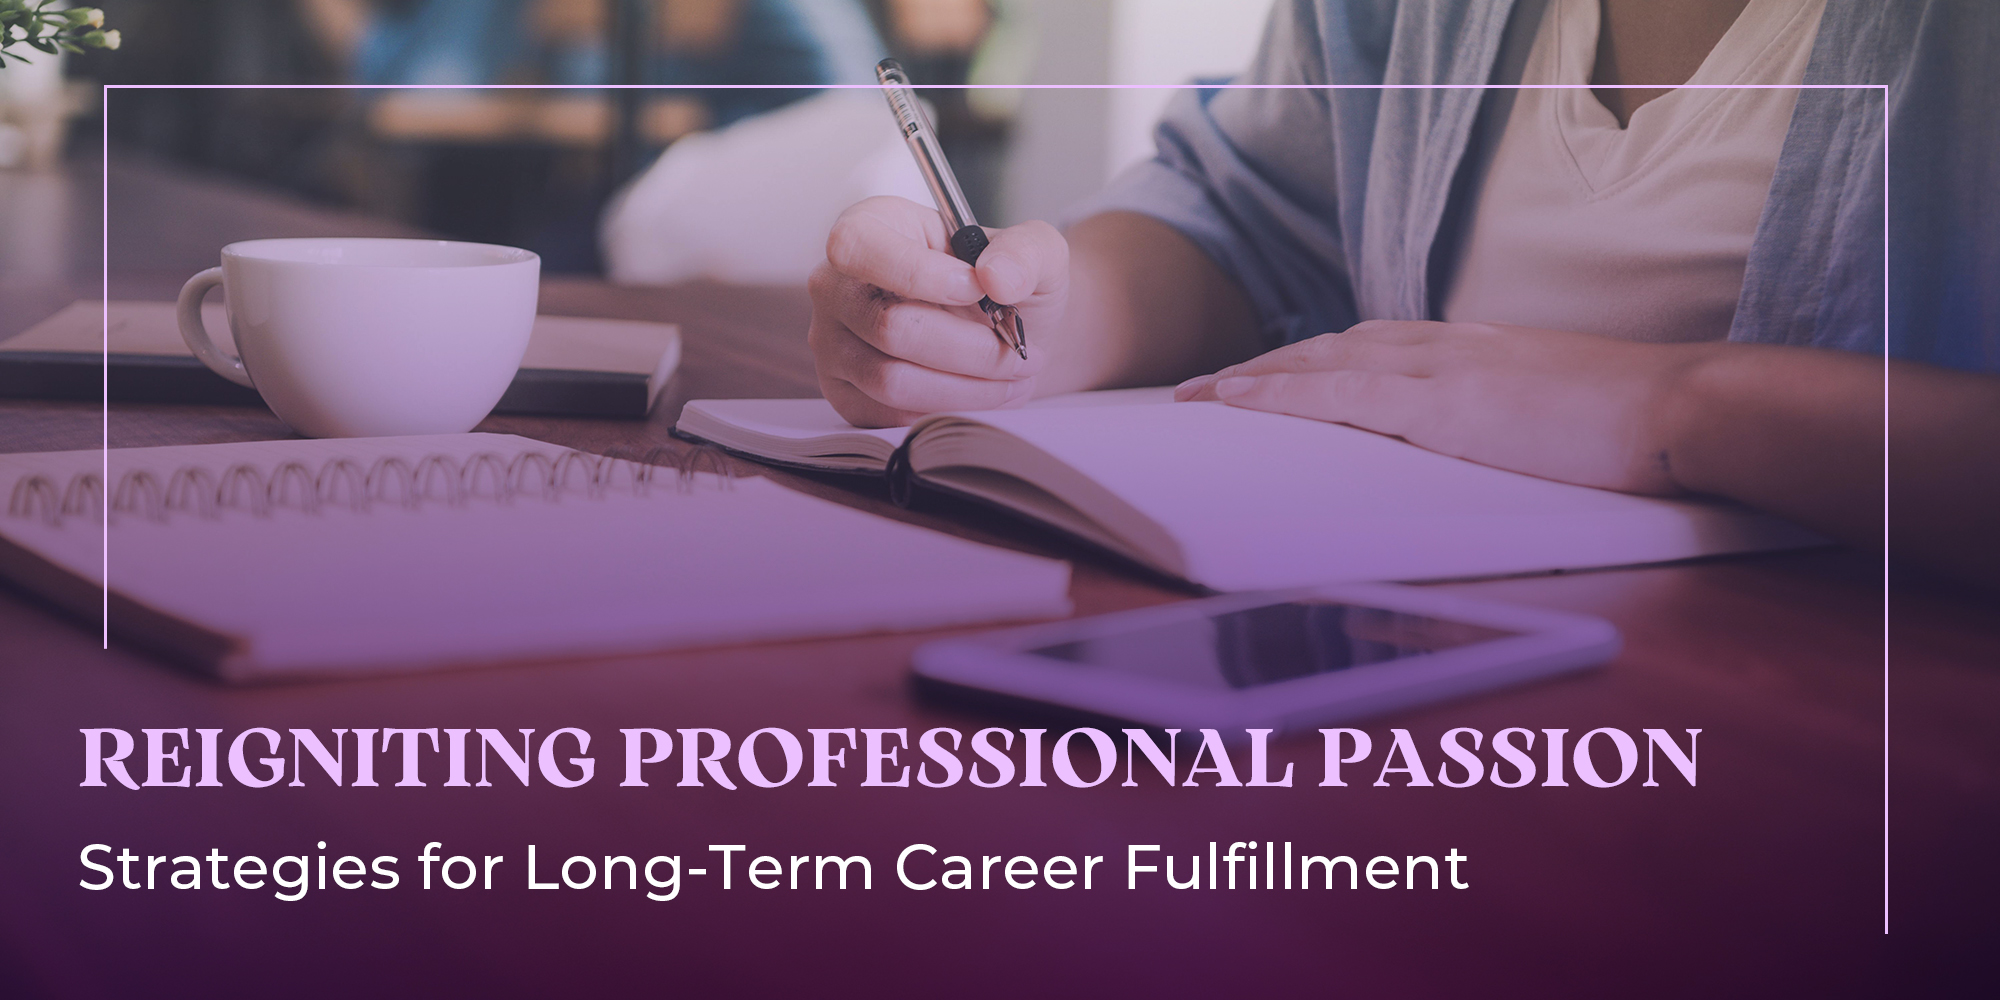 Reigniting Professional Passion: Strategies for Long-Term Career Fulfillment